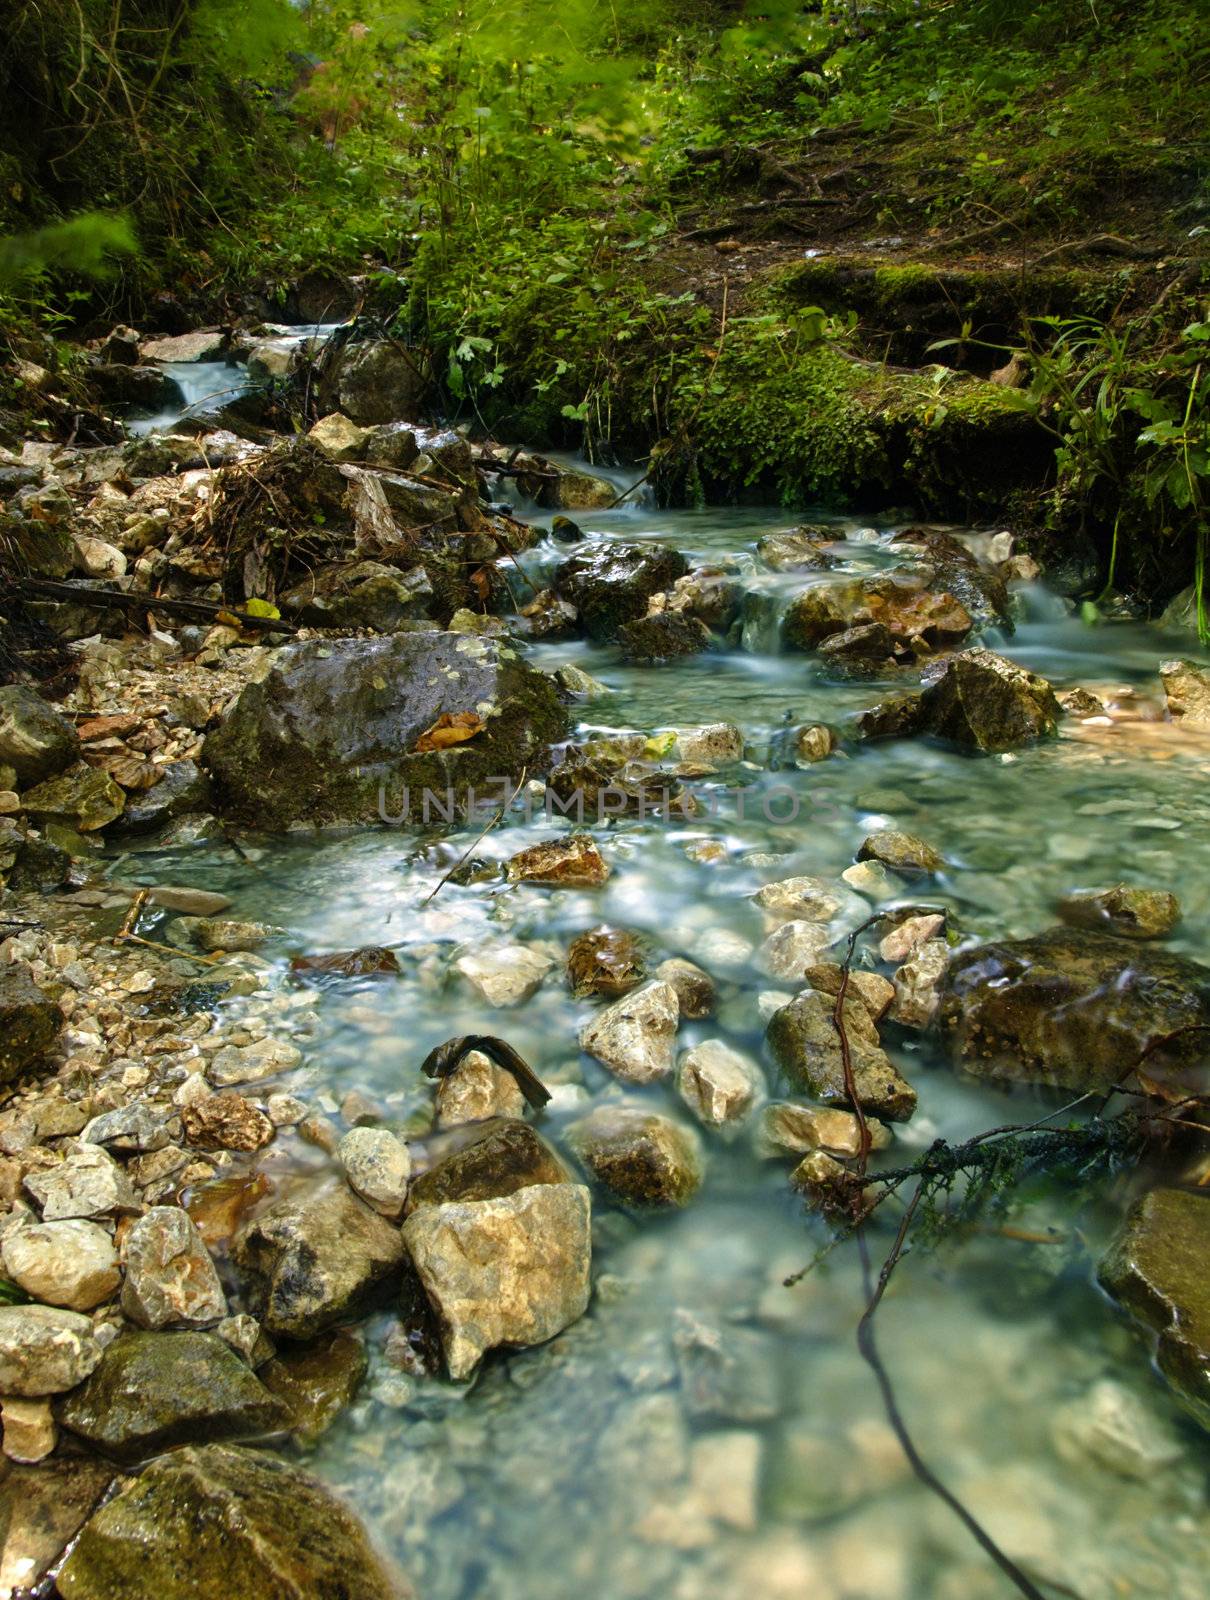 One of the many crystal clear brooks in the Slovakian paradise natural park